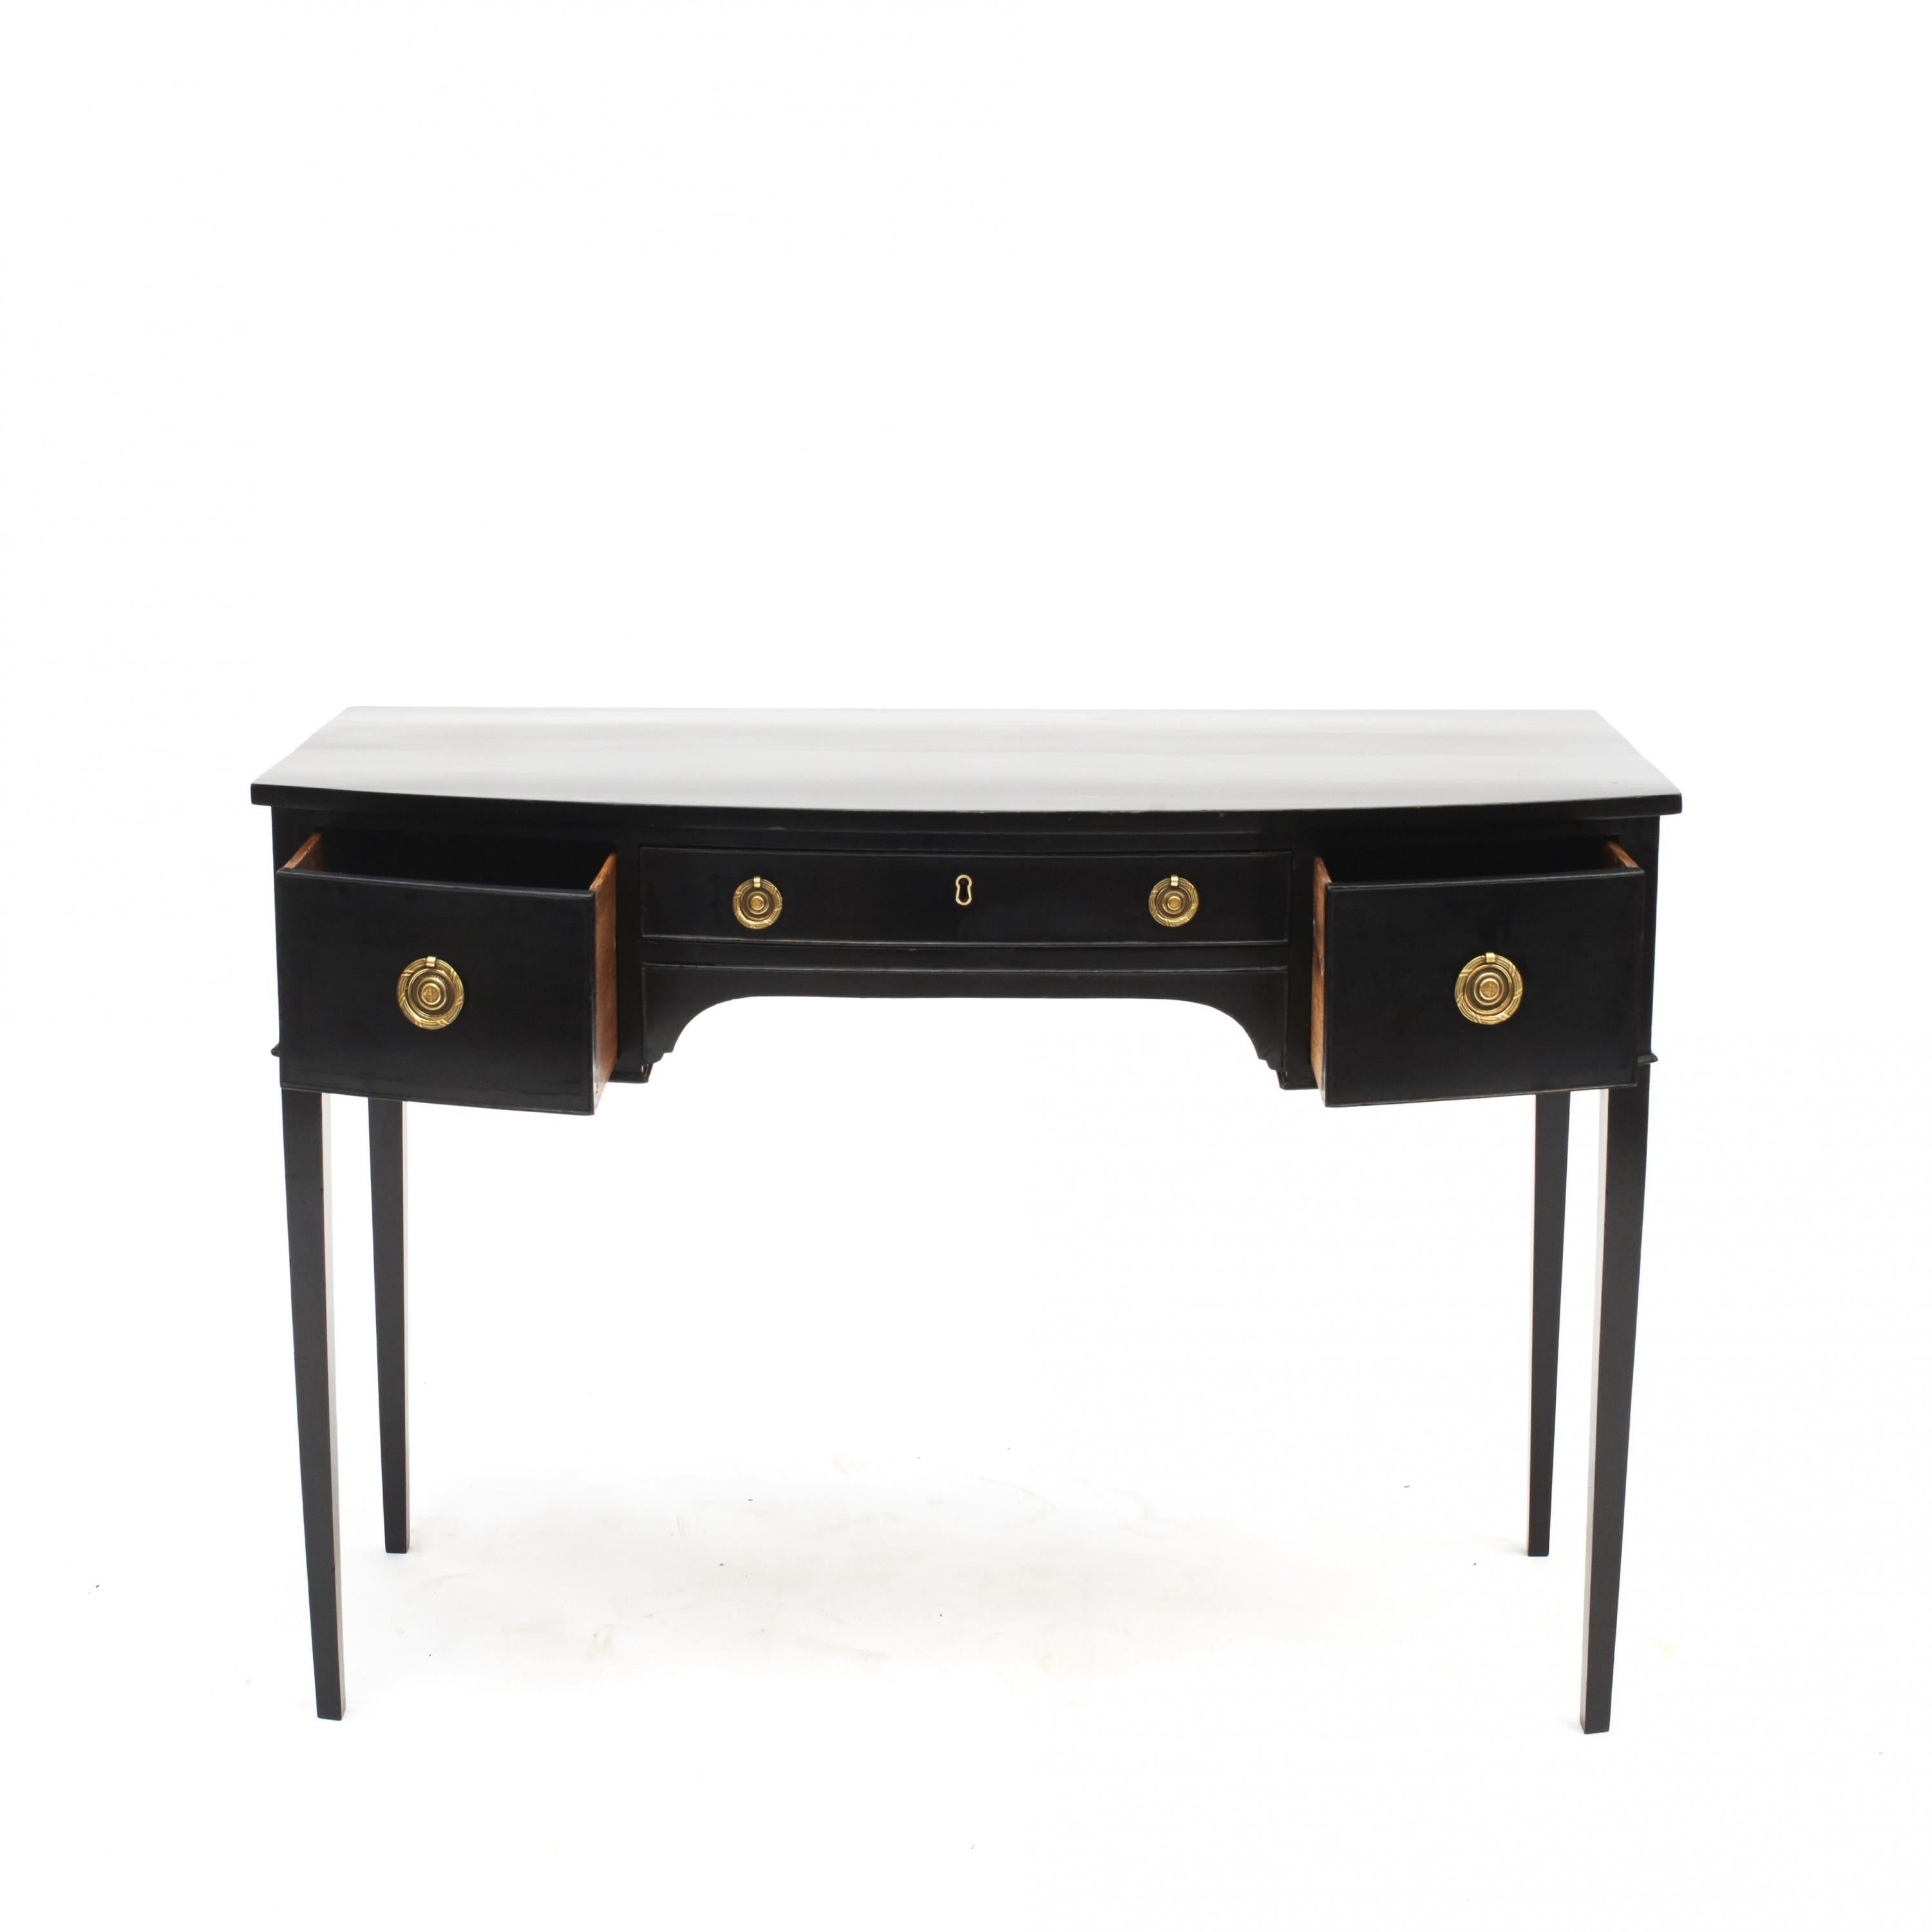 Polished English Early 19th Century Regency Console Table